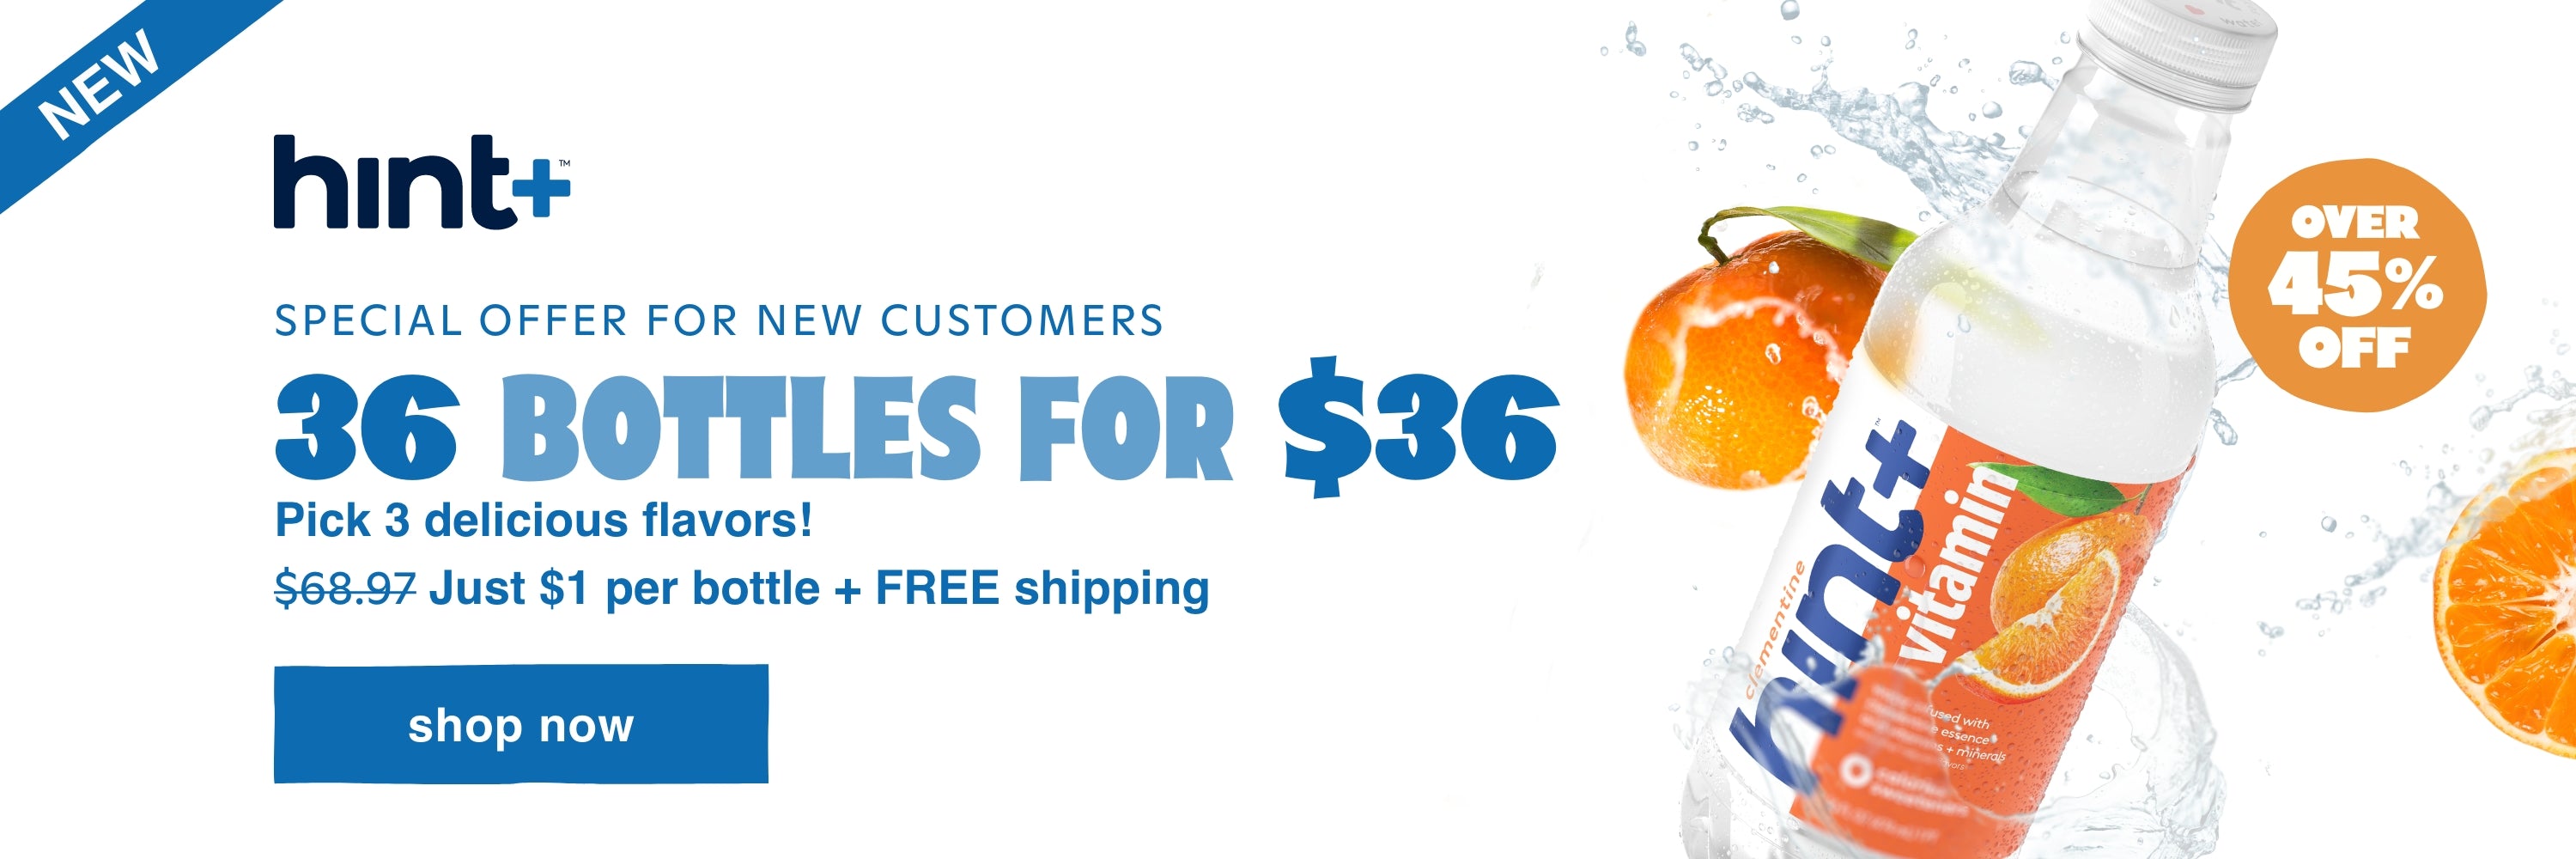 New! Hint Plus <br> over 45% off  for new customers. 36 bottles for $36. <br> Pick 3 delicious flavors! <br> Just $1 per bottle + FREE shipping <br> Shop Now